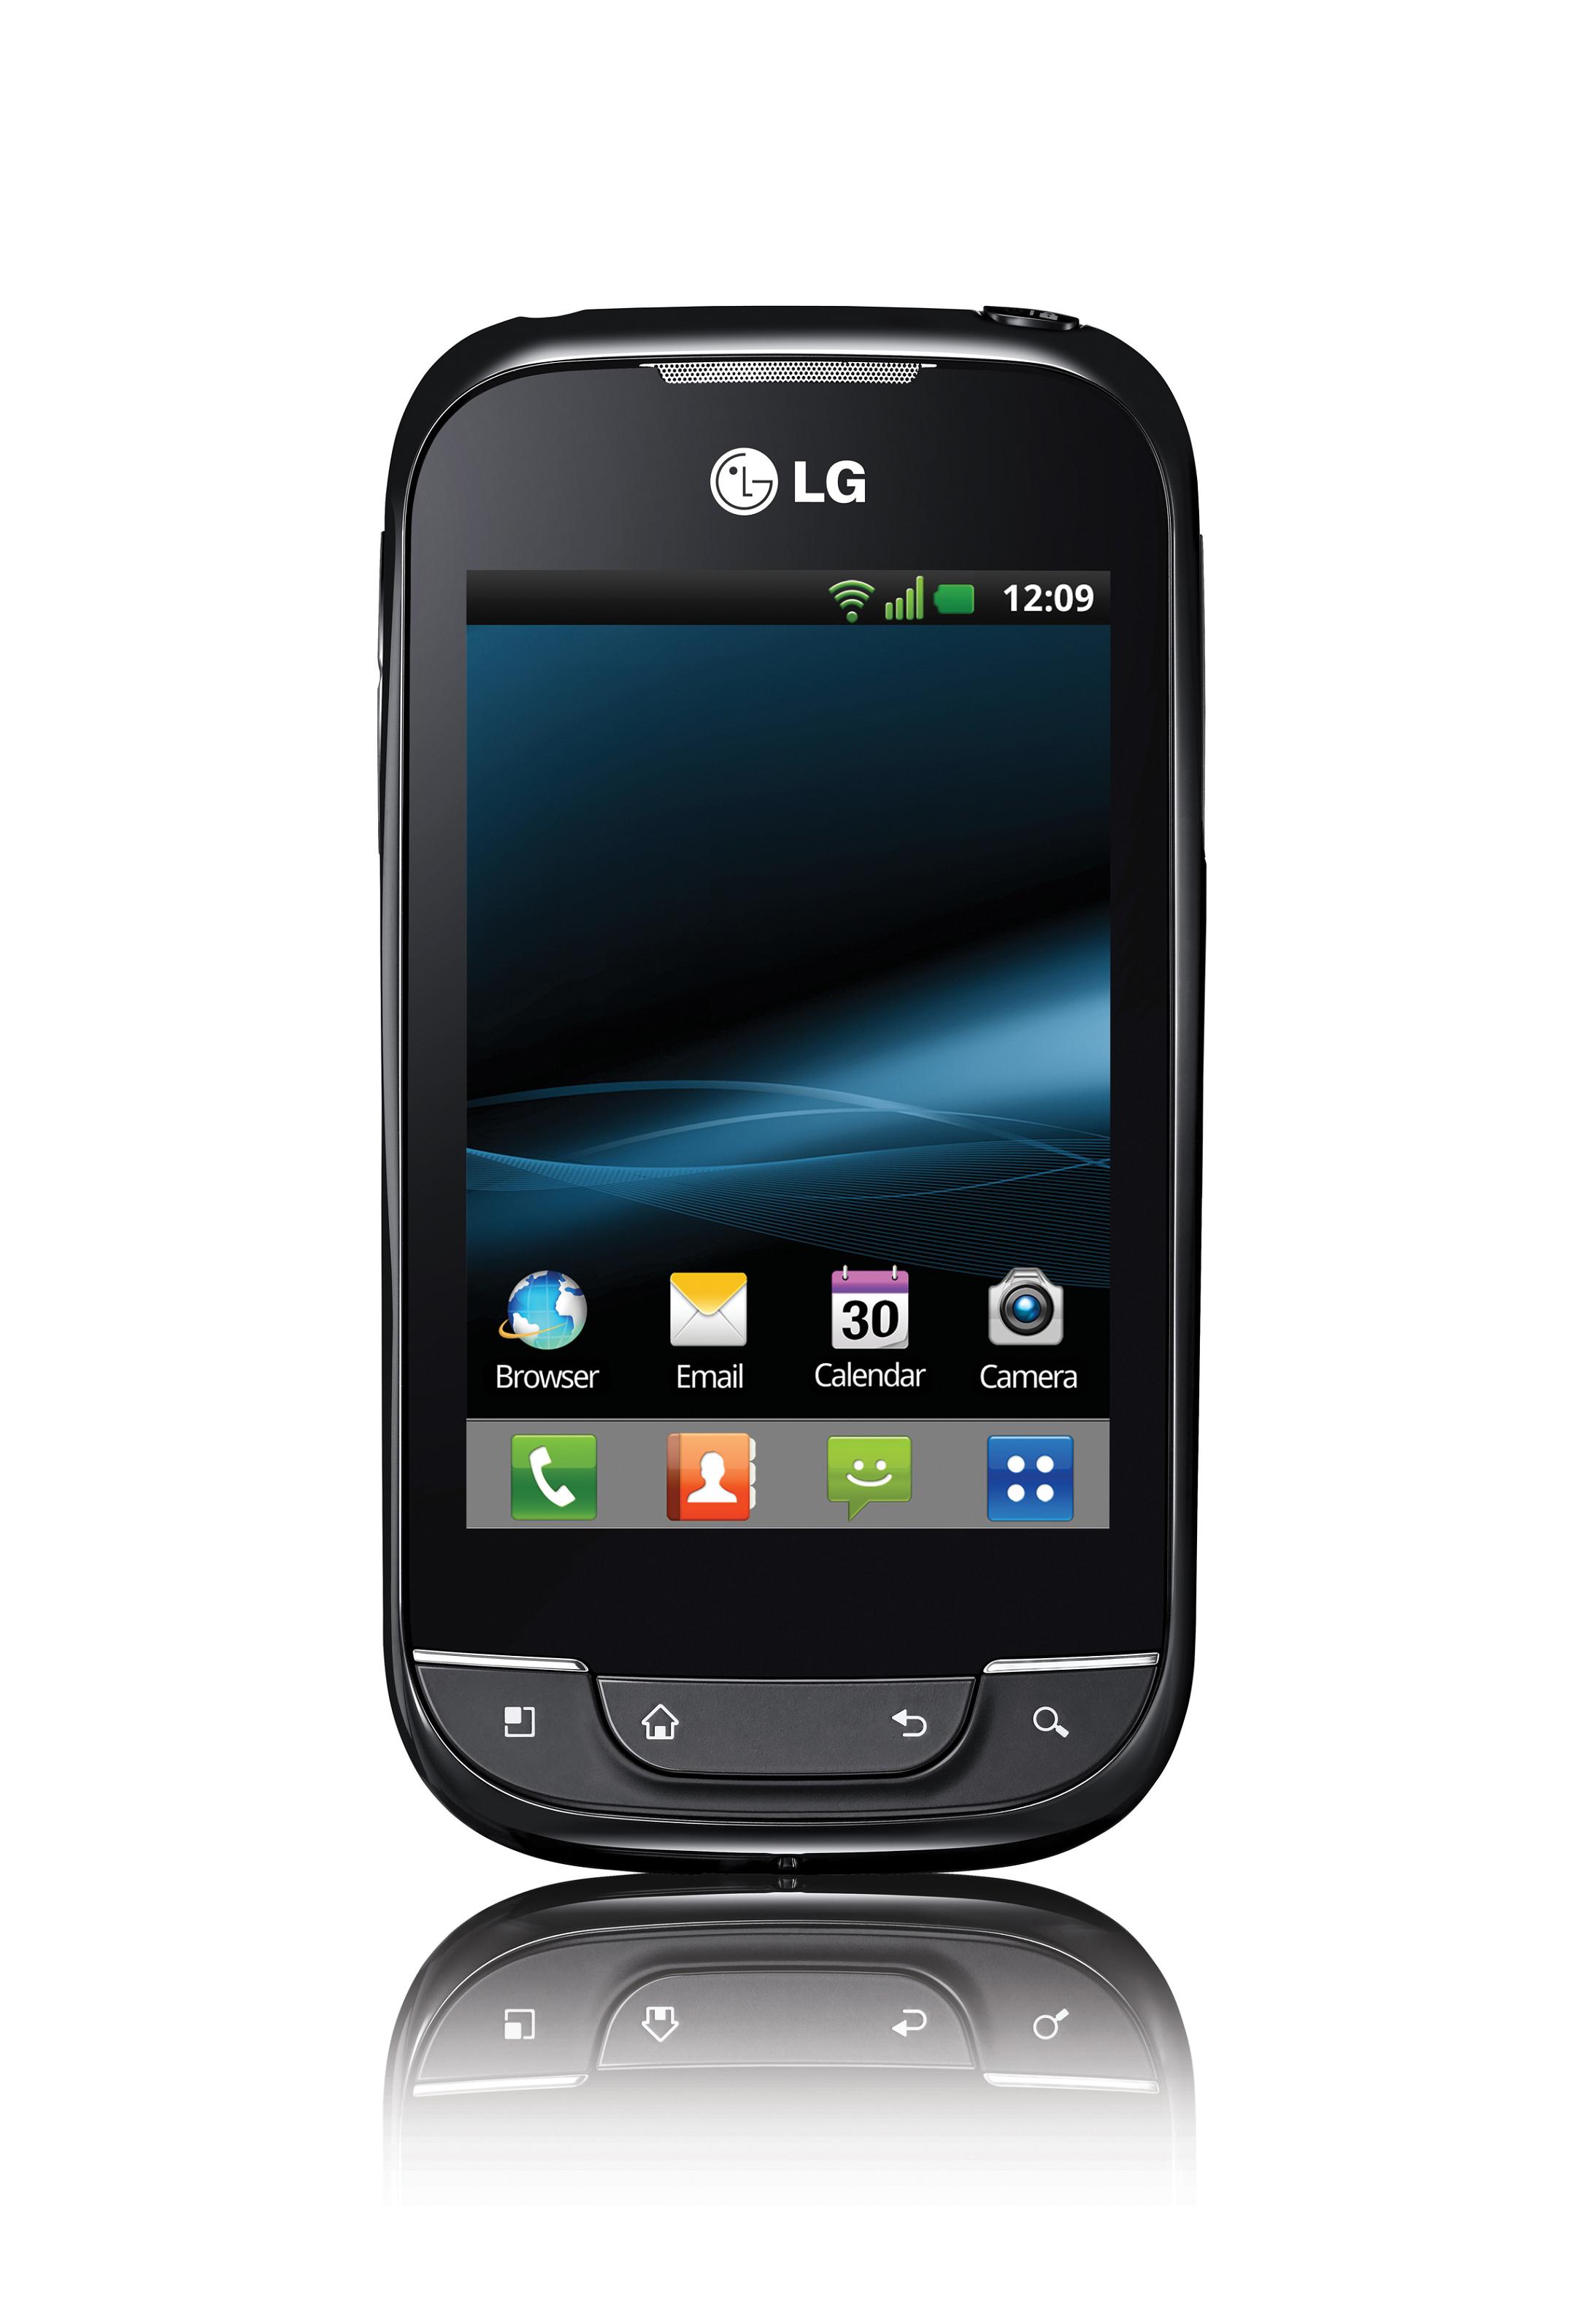 LG RAISES THE ANTE WITH TWO NEW GINGERBREAD SMARTPHONES | LG Newsroom